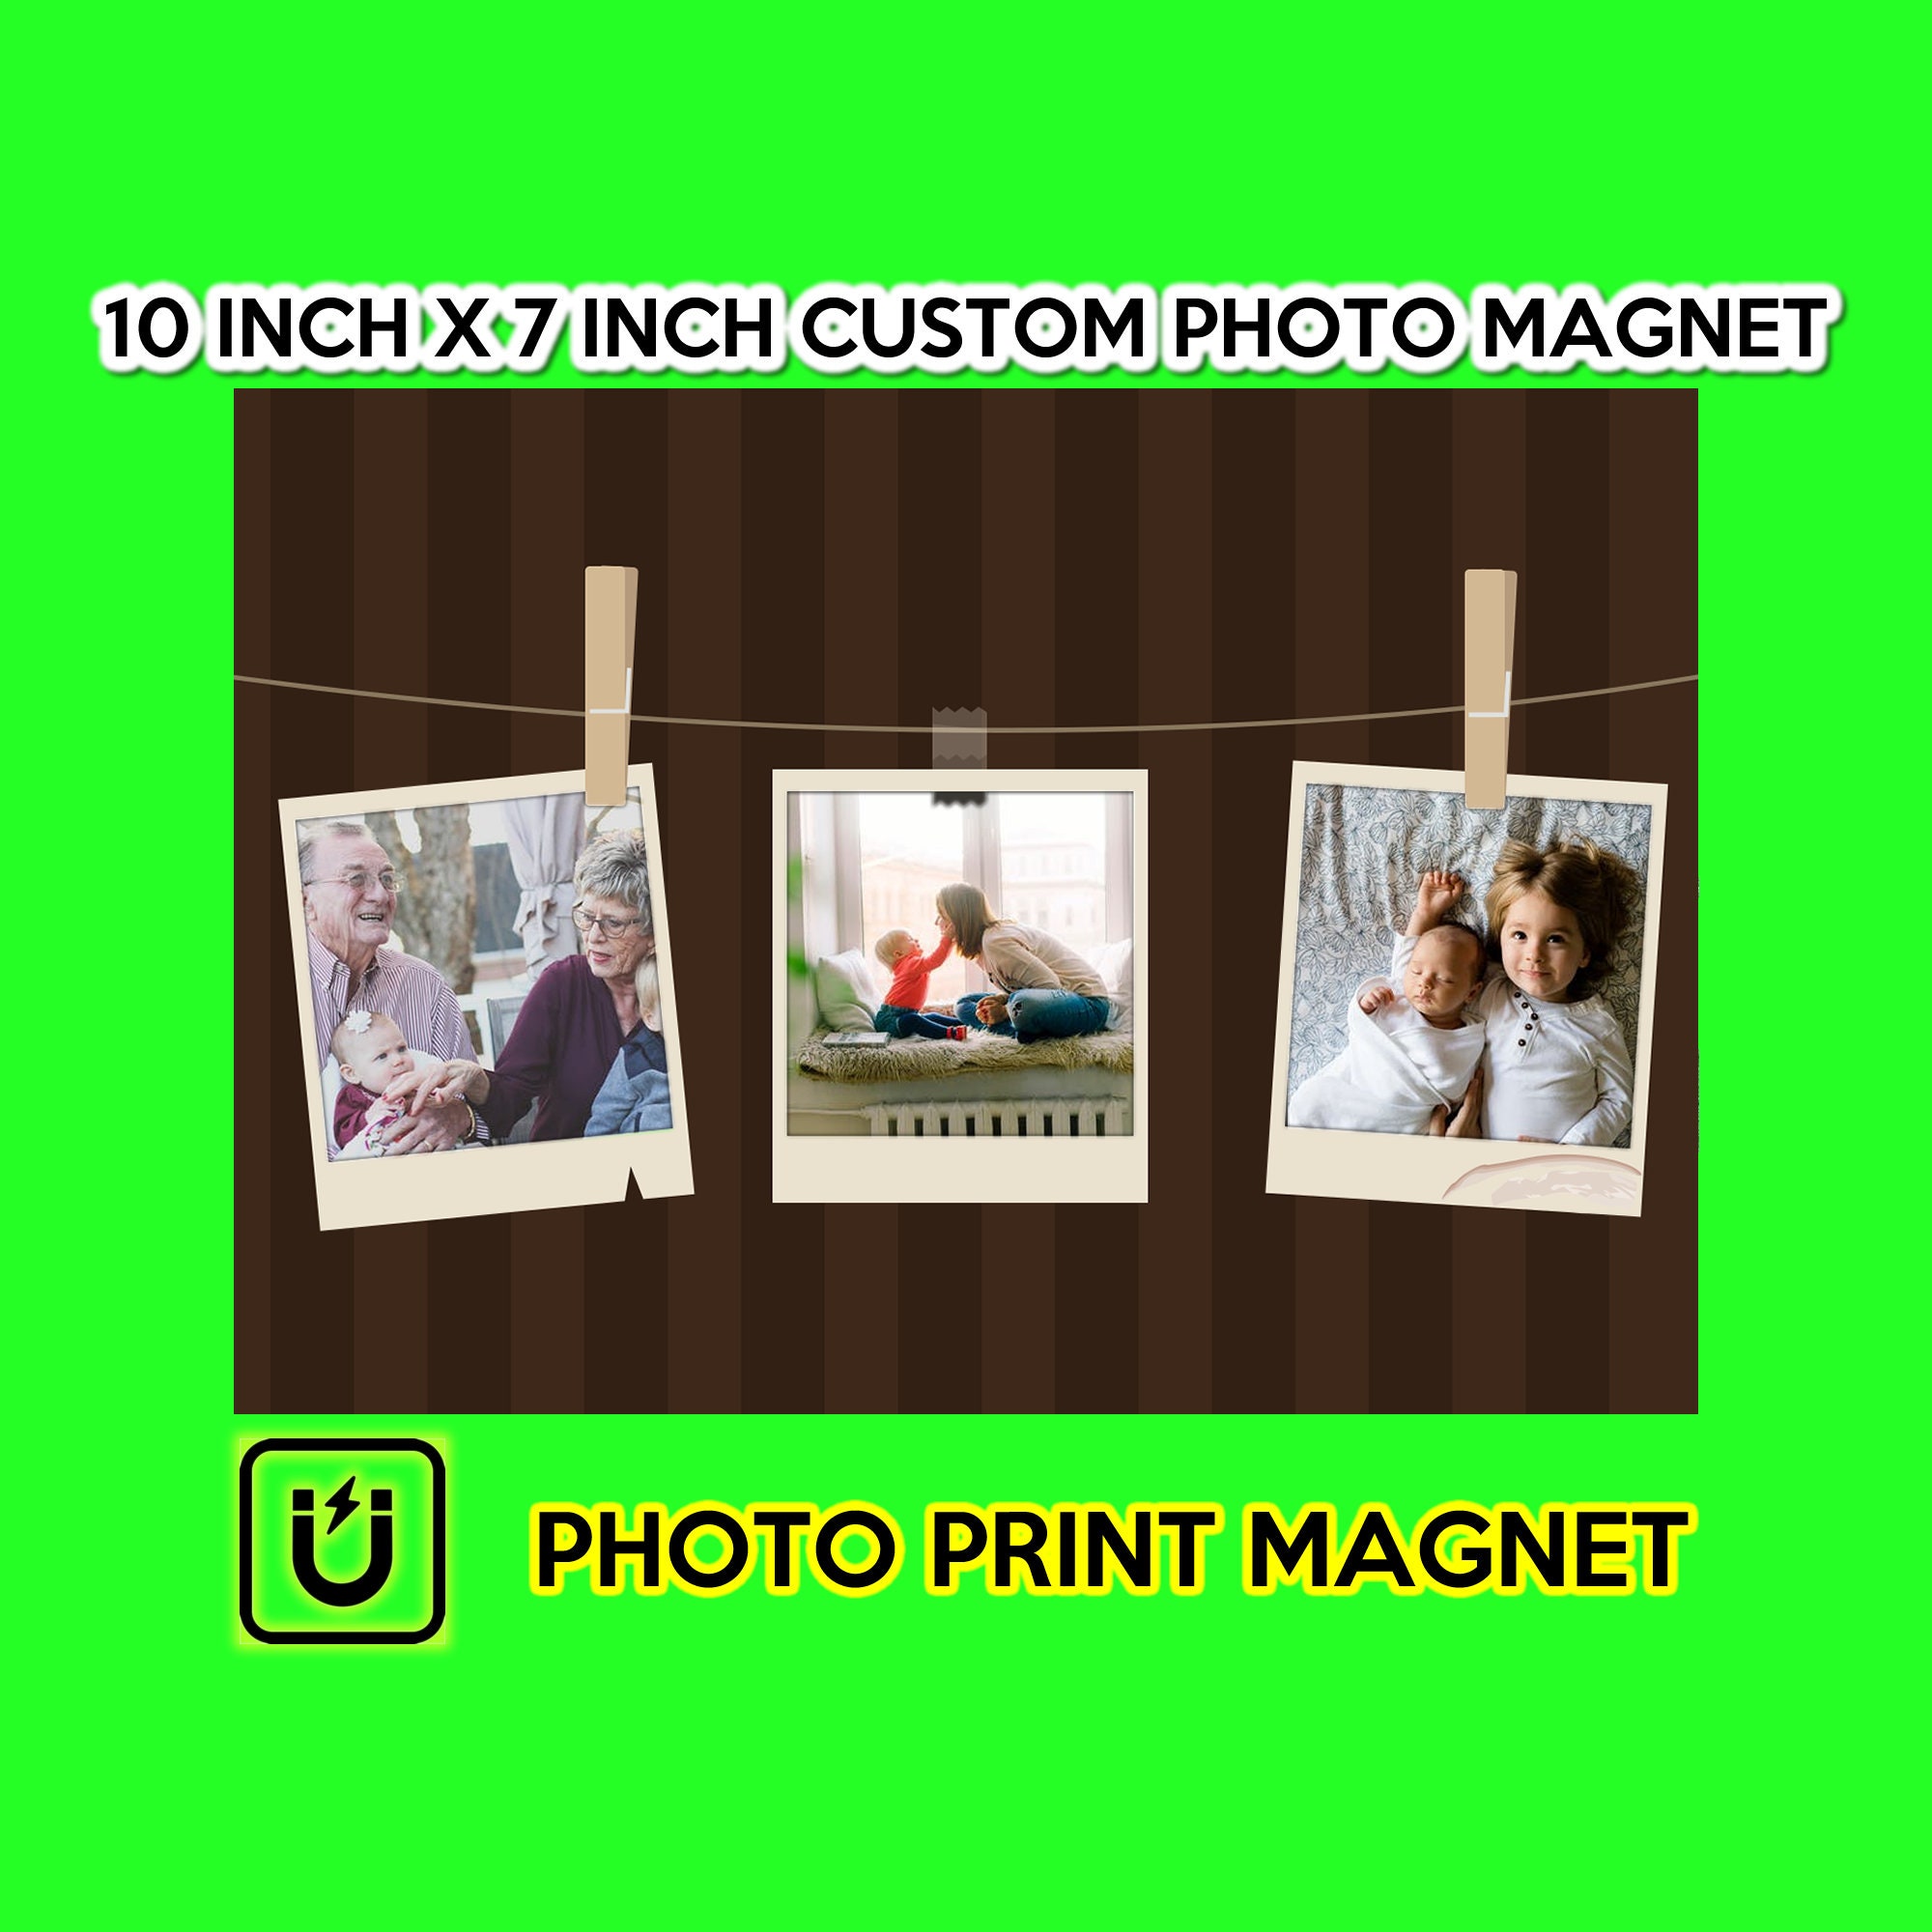 Photo Magnet, large 10 inch wide by 7 inch high photo print on magnet great for fridges and your special photos or everyday fun photos